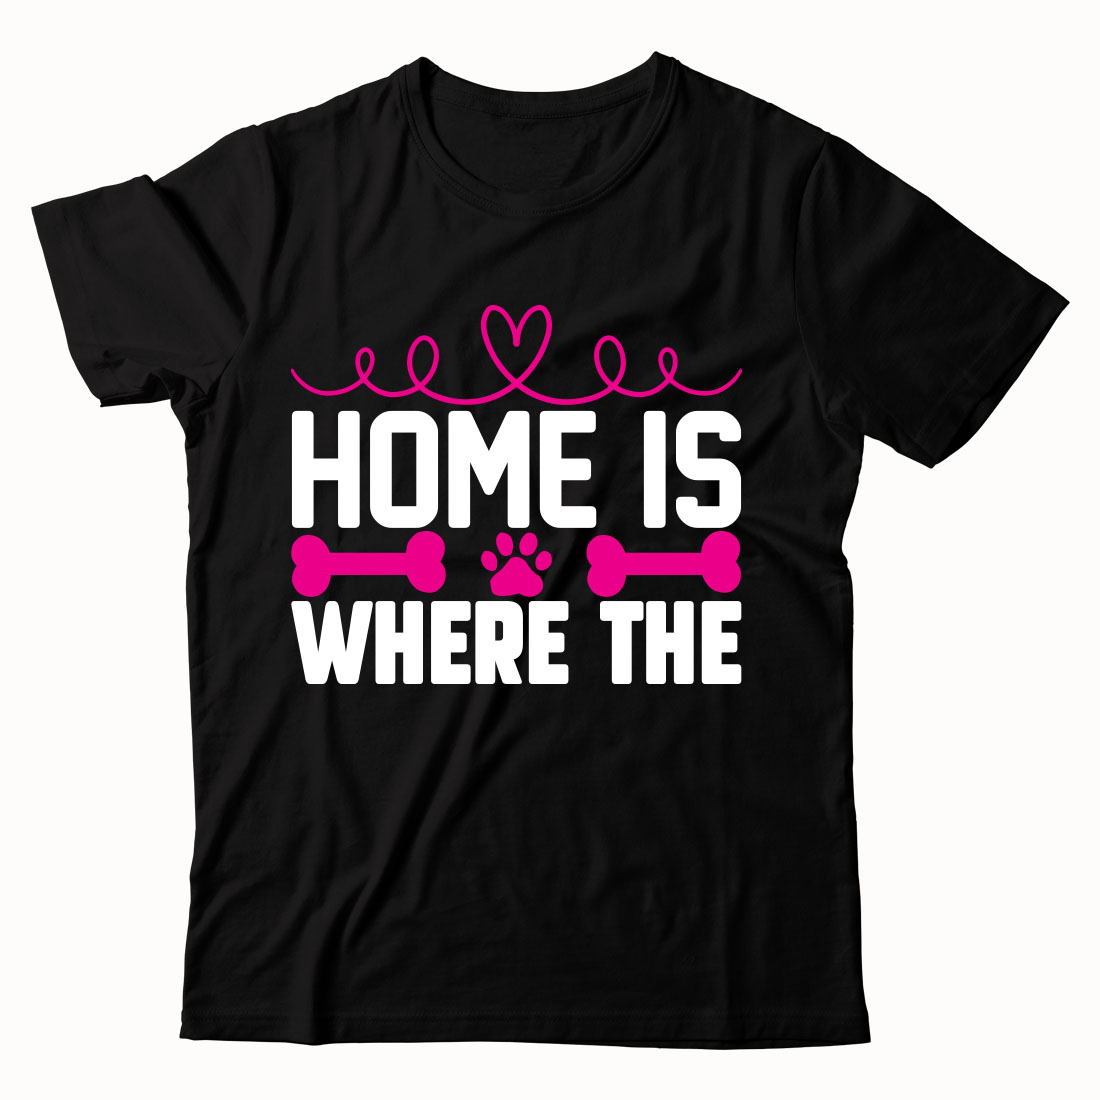 Black t - shirt that says home is where the dog is.